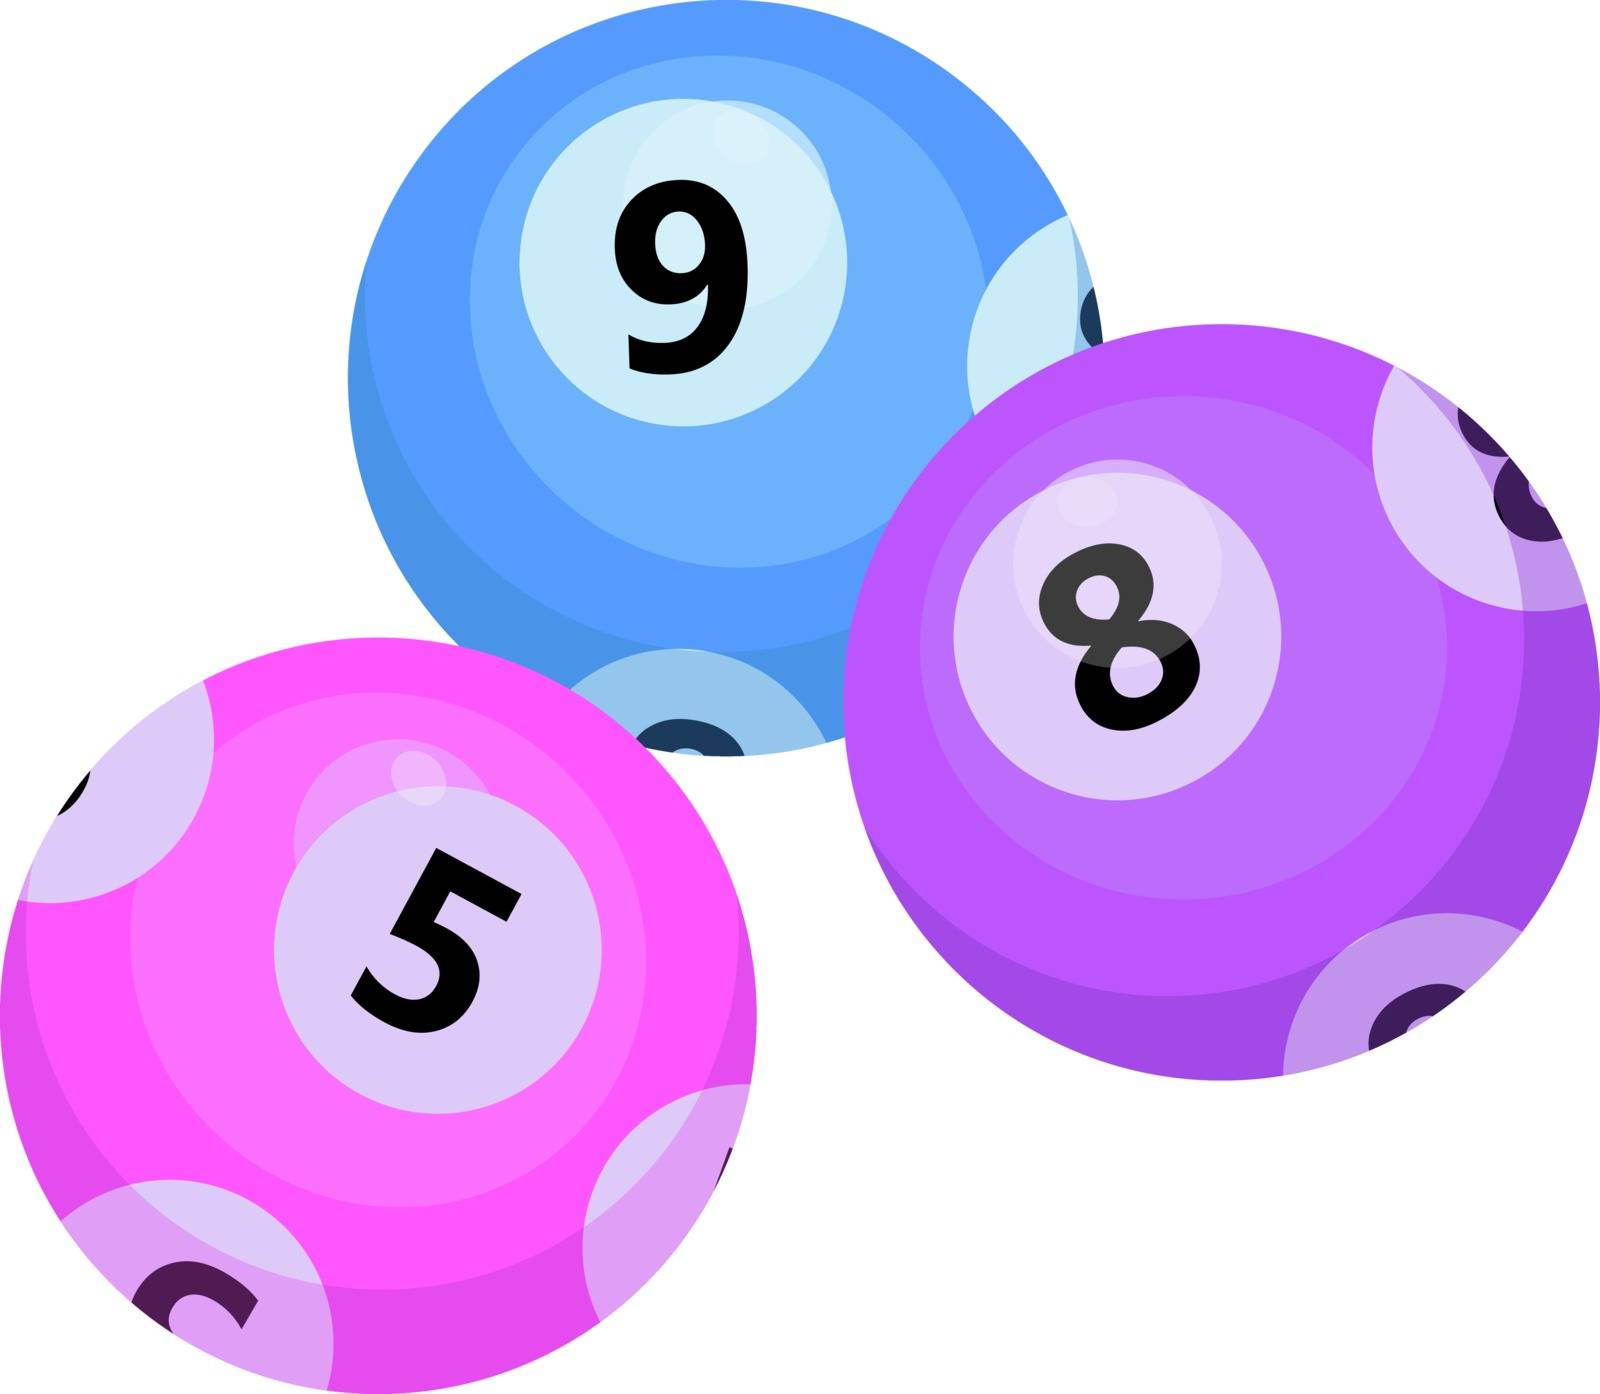 Balls with lotto bingo numbers, lottery numbered balls for keno game, icon flat style. Isolated on a white background. Vector illustration.